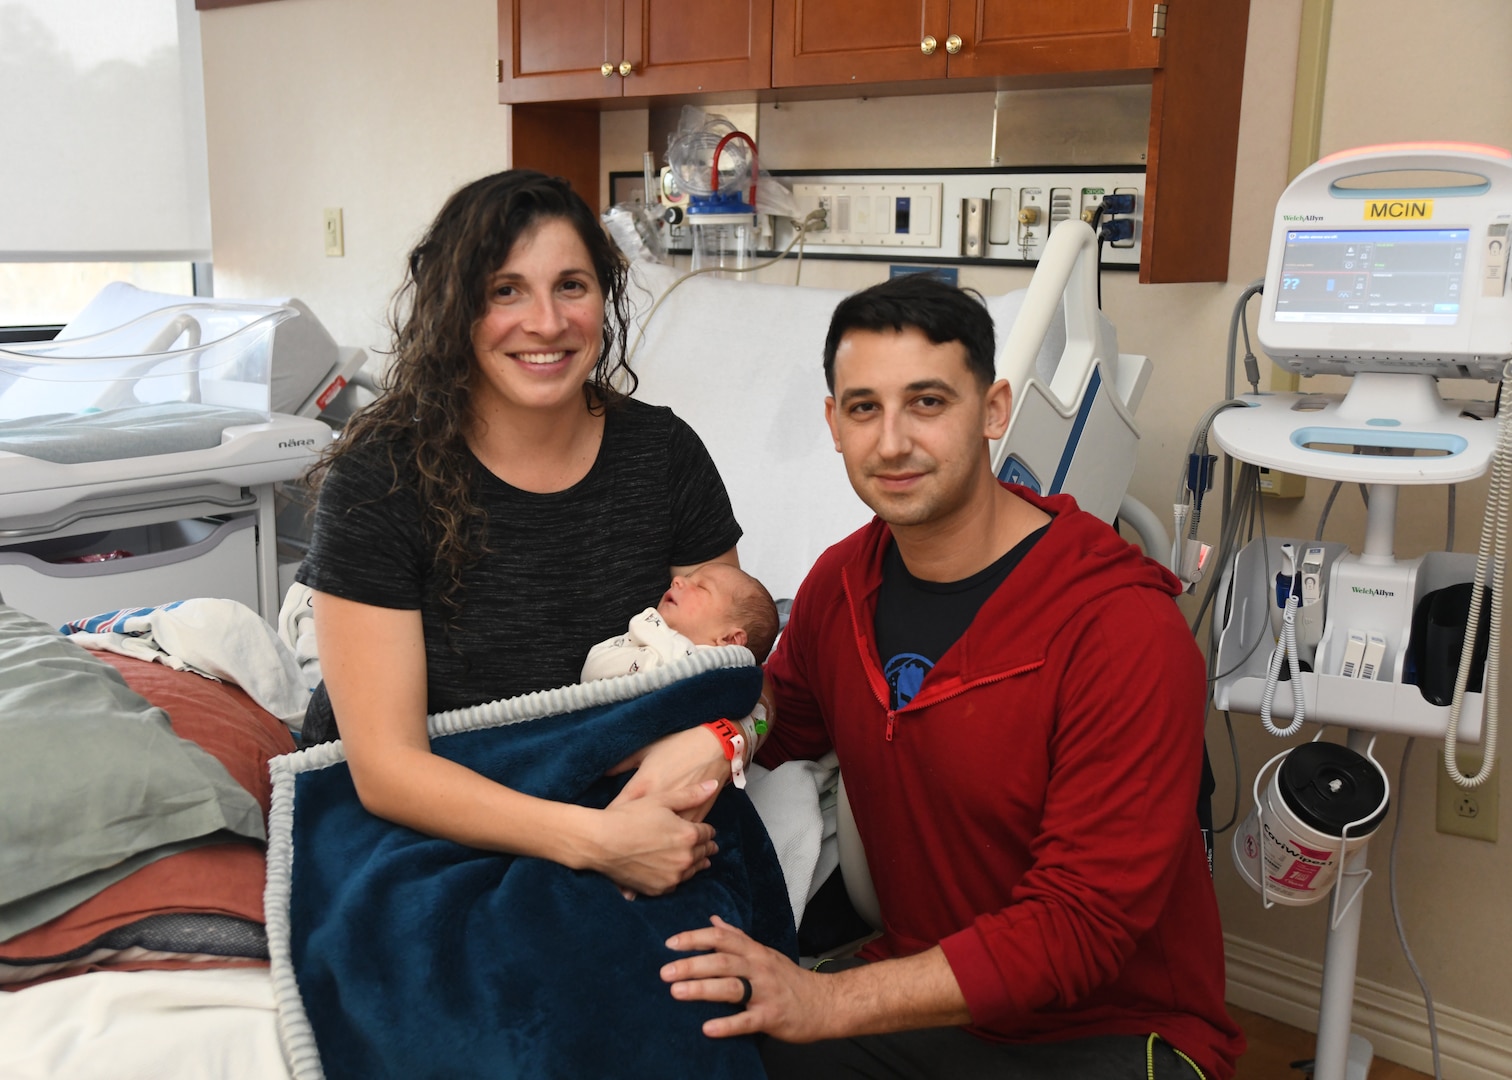 Naval Medical Center Camp Lejeune welcomed its first baby of the new year at 10:15 a.m. on January 2, 2023. Rowan Joseph Acevedo Kouris was welcomed into the world by his proud parents, Sergeant James Kouris and Trisha Acevedo. Sgt. Kouris is a United States Marine stationed at Marine Corps Air Station Cherry Point; Rowan's mother shared she was also born at the medical center.